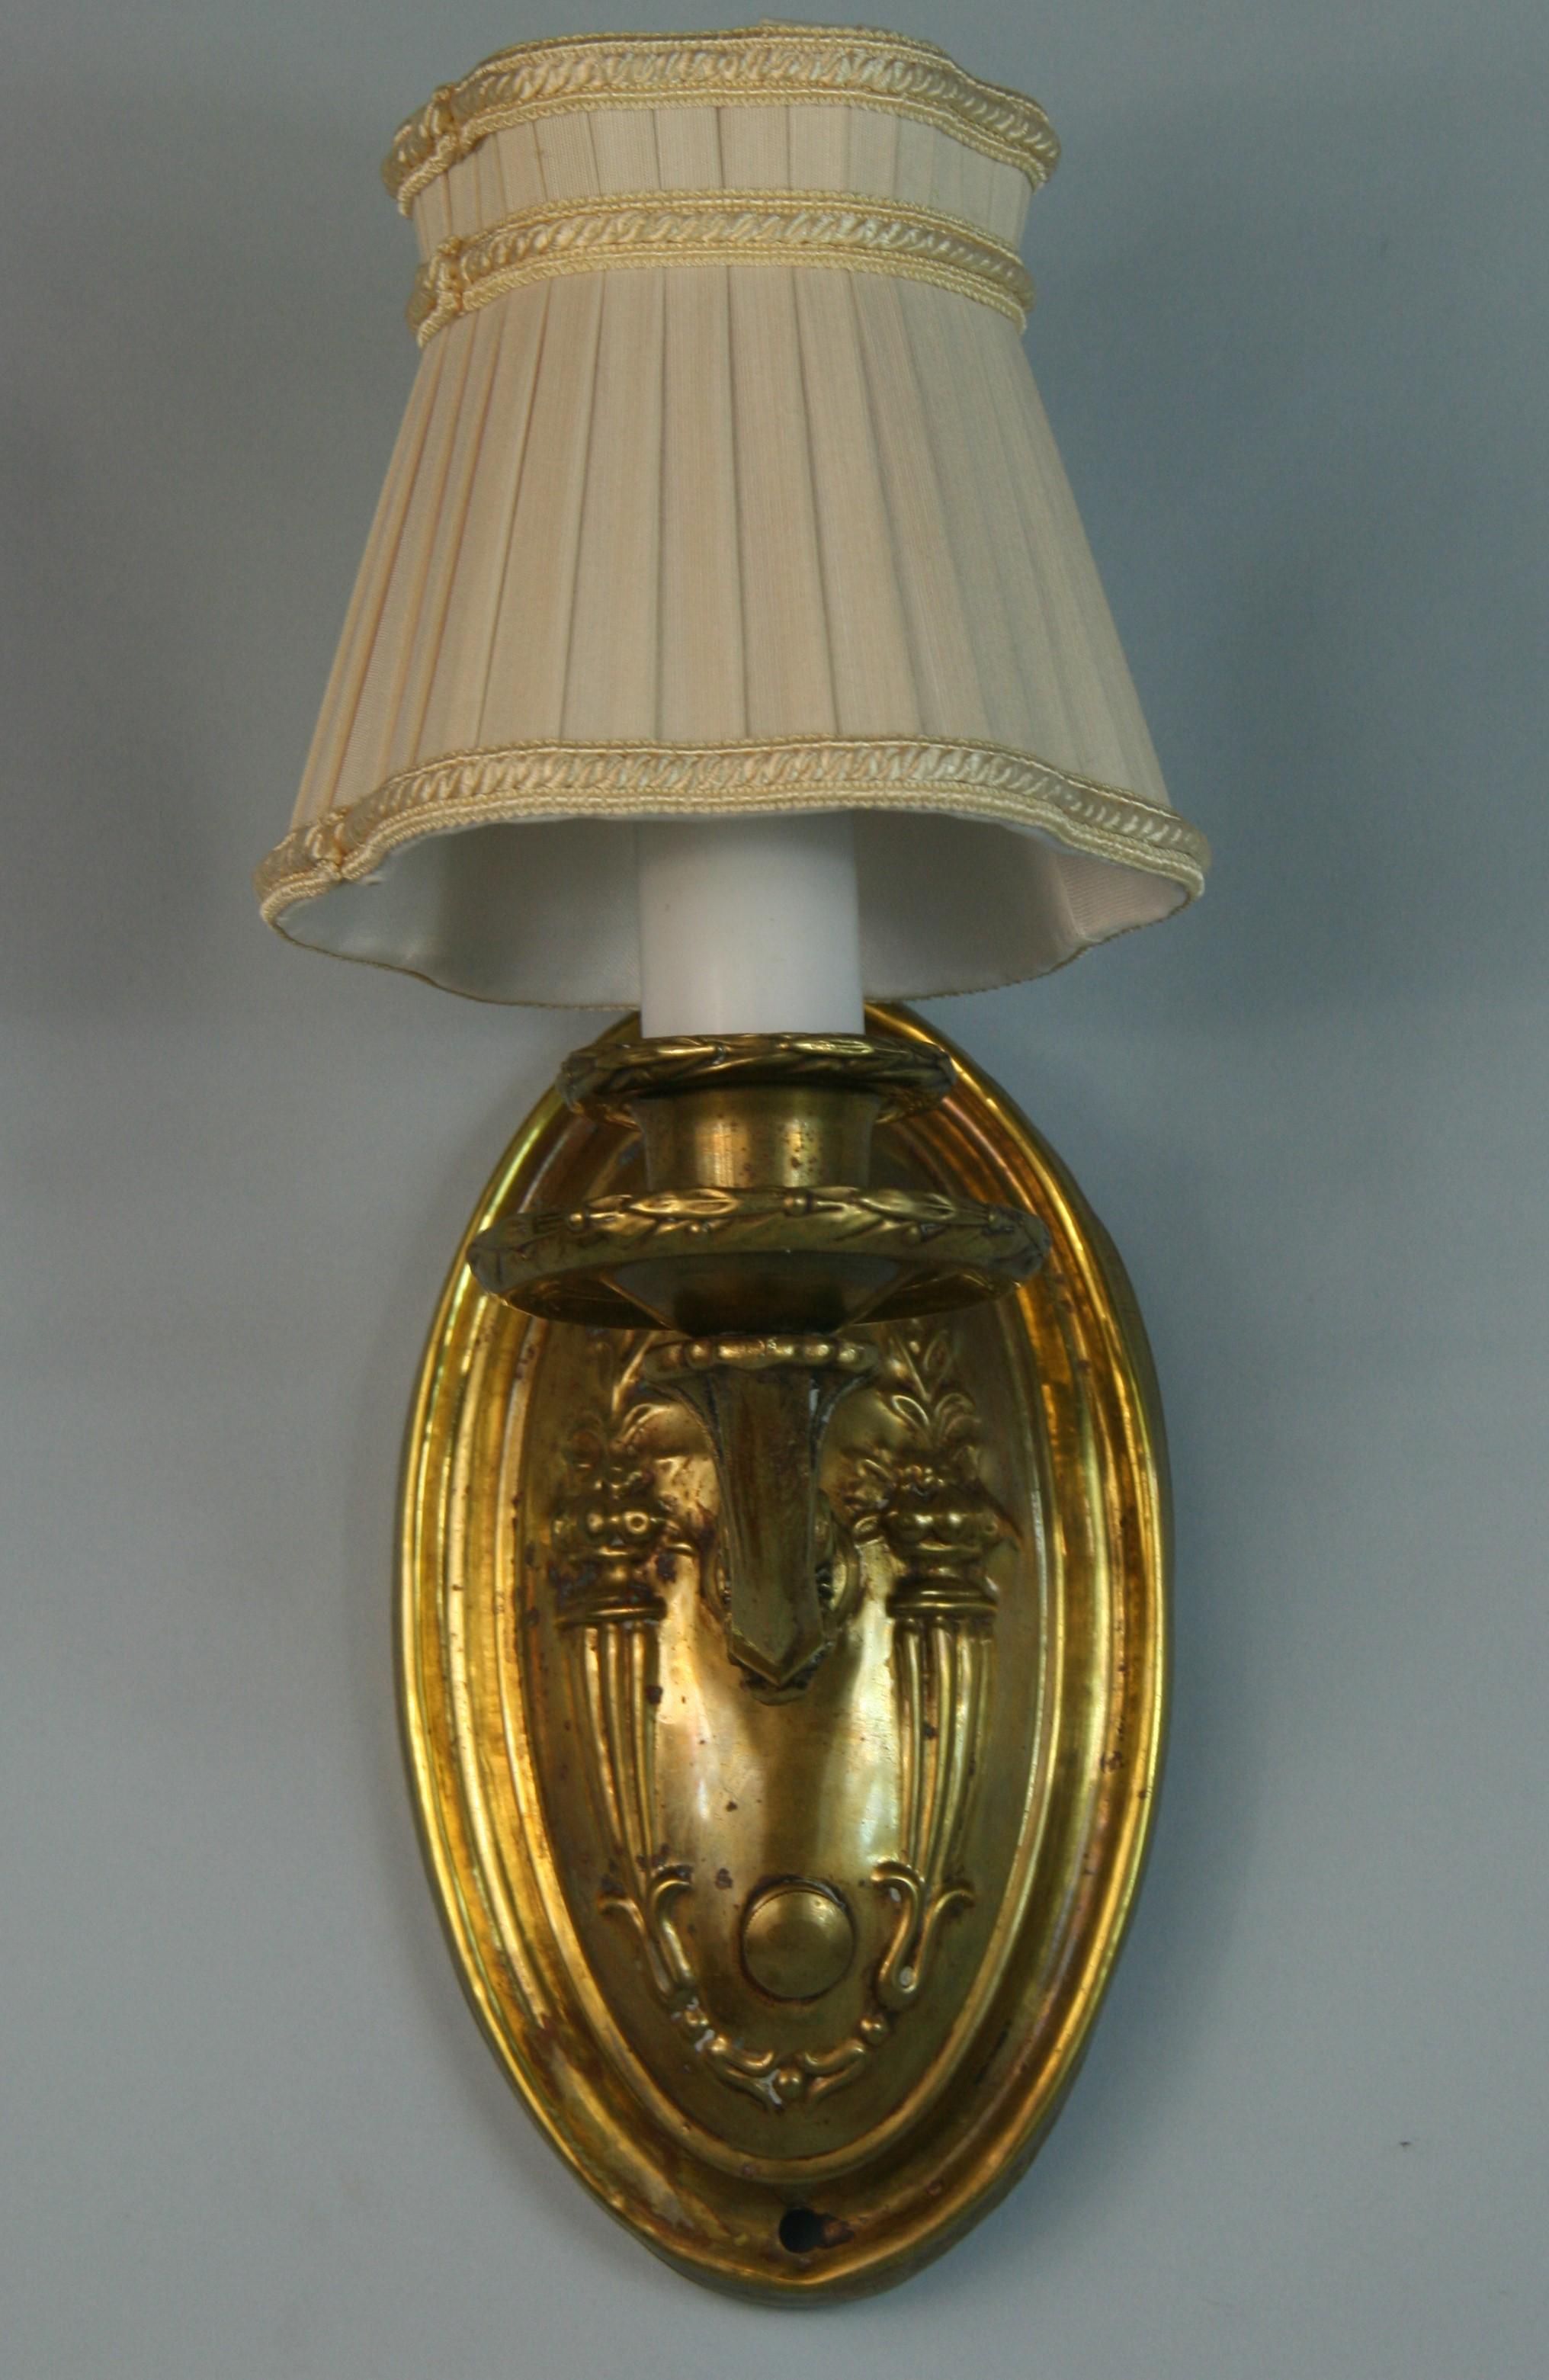 1604 Antique pair of brass repousse sconces with custom shade
Takes 40 watt max Edison based bulb
Rewired.